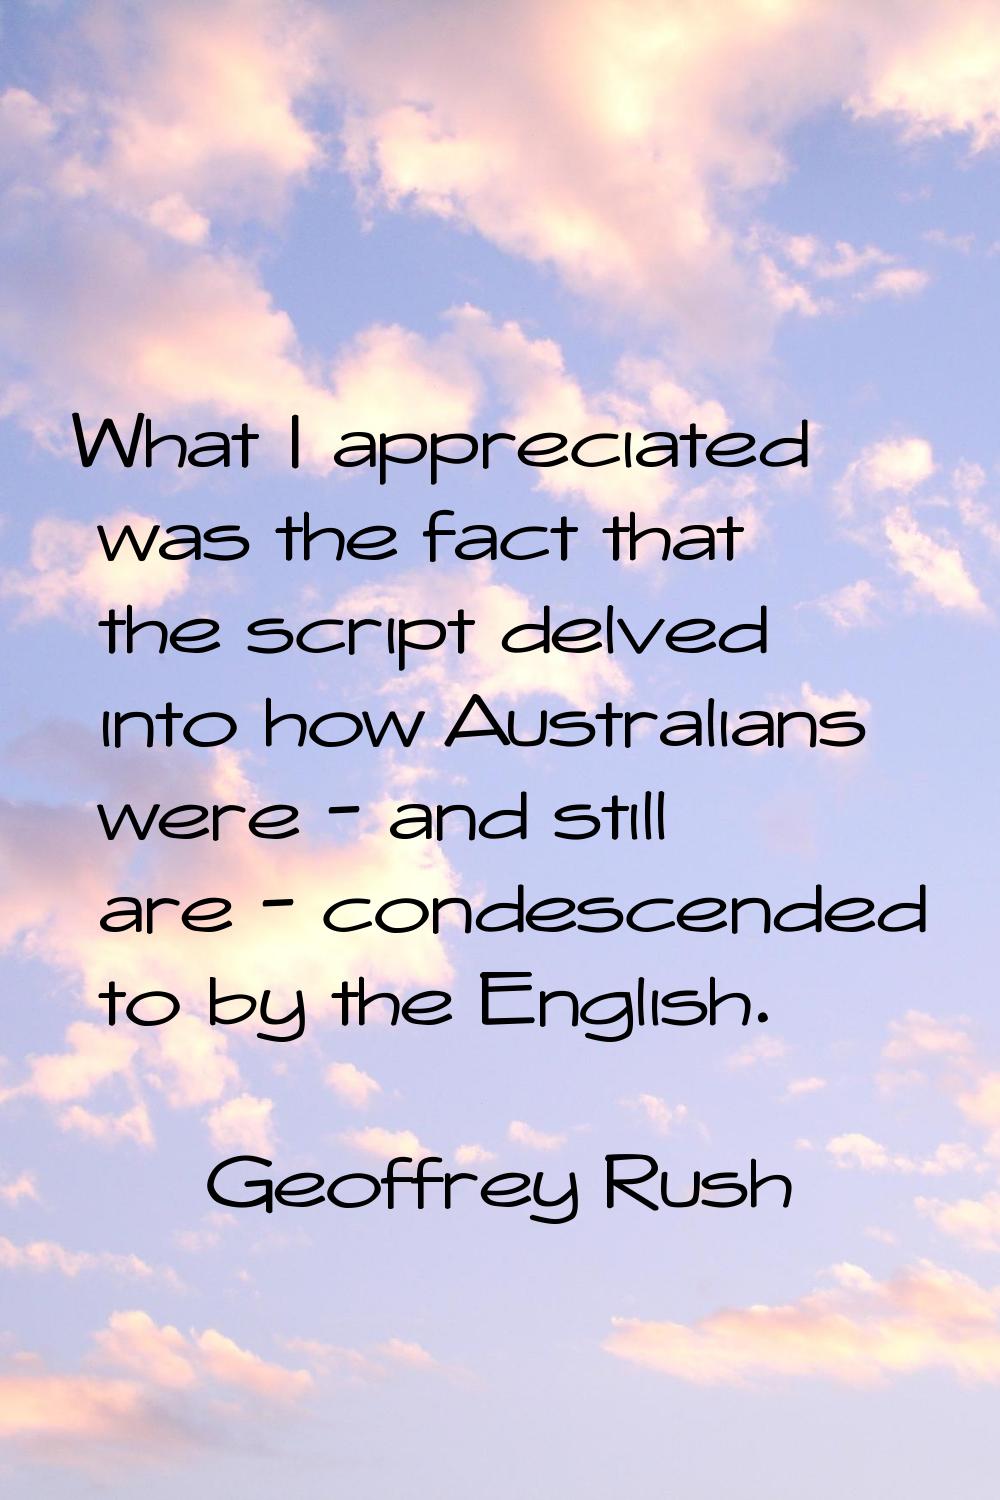 What I appreciated was the fact that the script delved into how Australians were - and still are - 